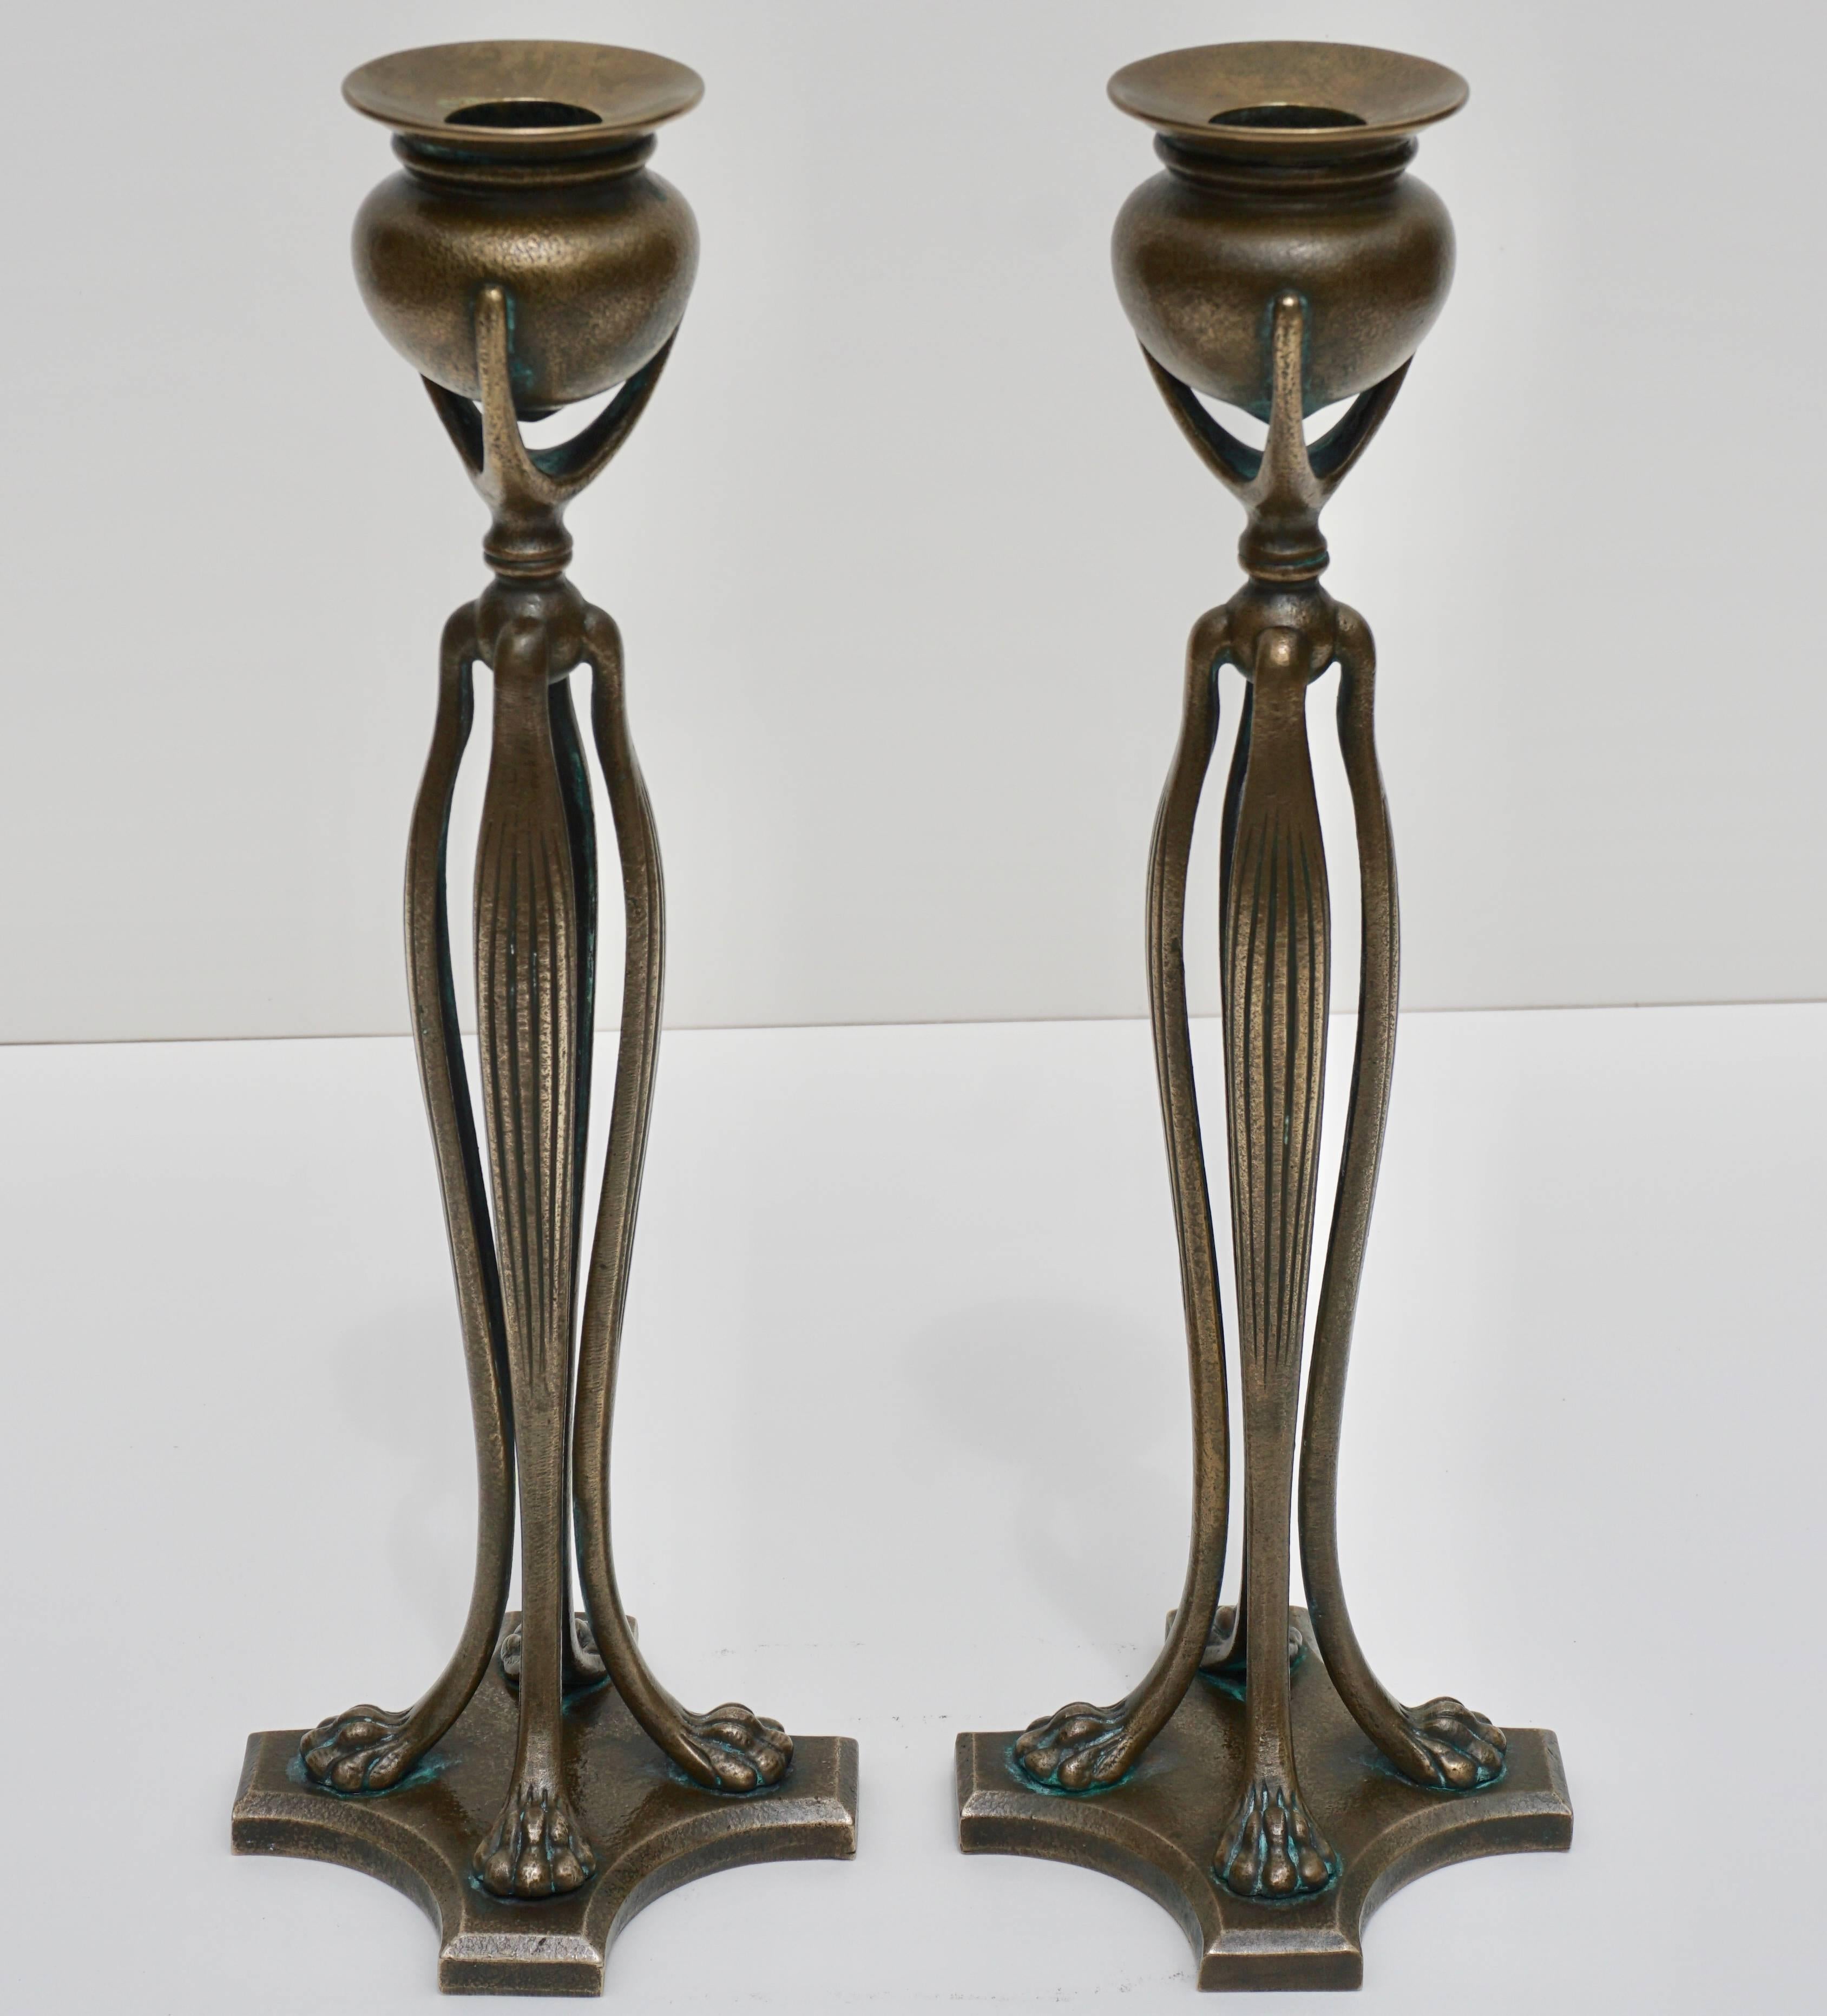 Tiffany studios New York Art Nouveau candlesticks, 1900. These bronze patinated and gilt candle holders are in mint condition. Supported by four lion’s paw feet on a cross stand. Light brown to gold textured finish patina.

Stamped: TIFFANY STUDIOS